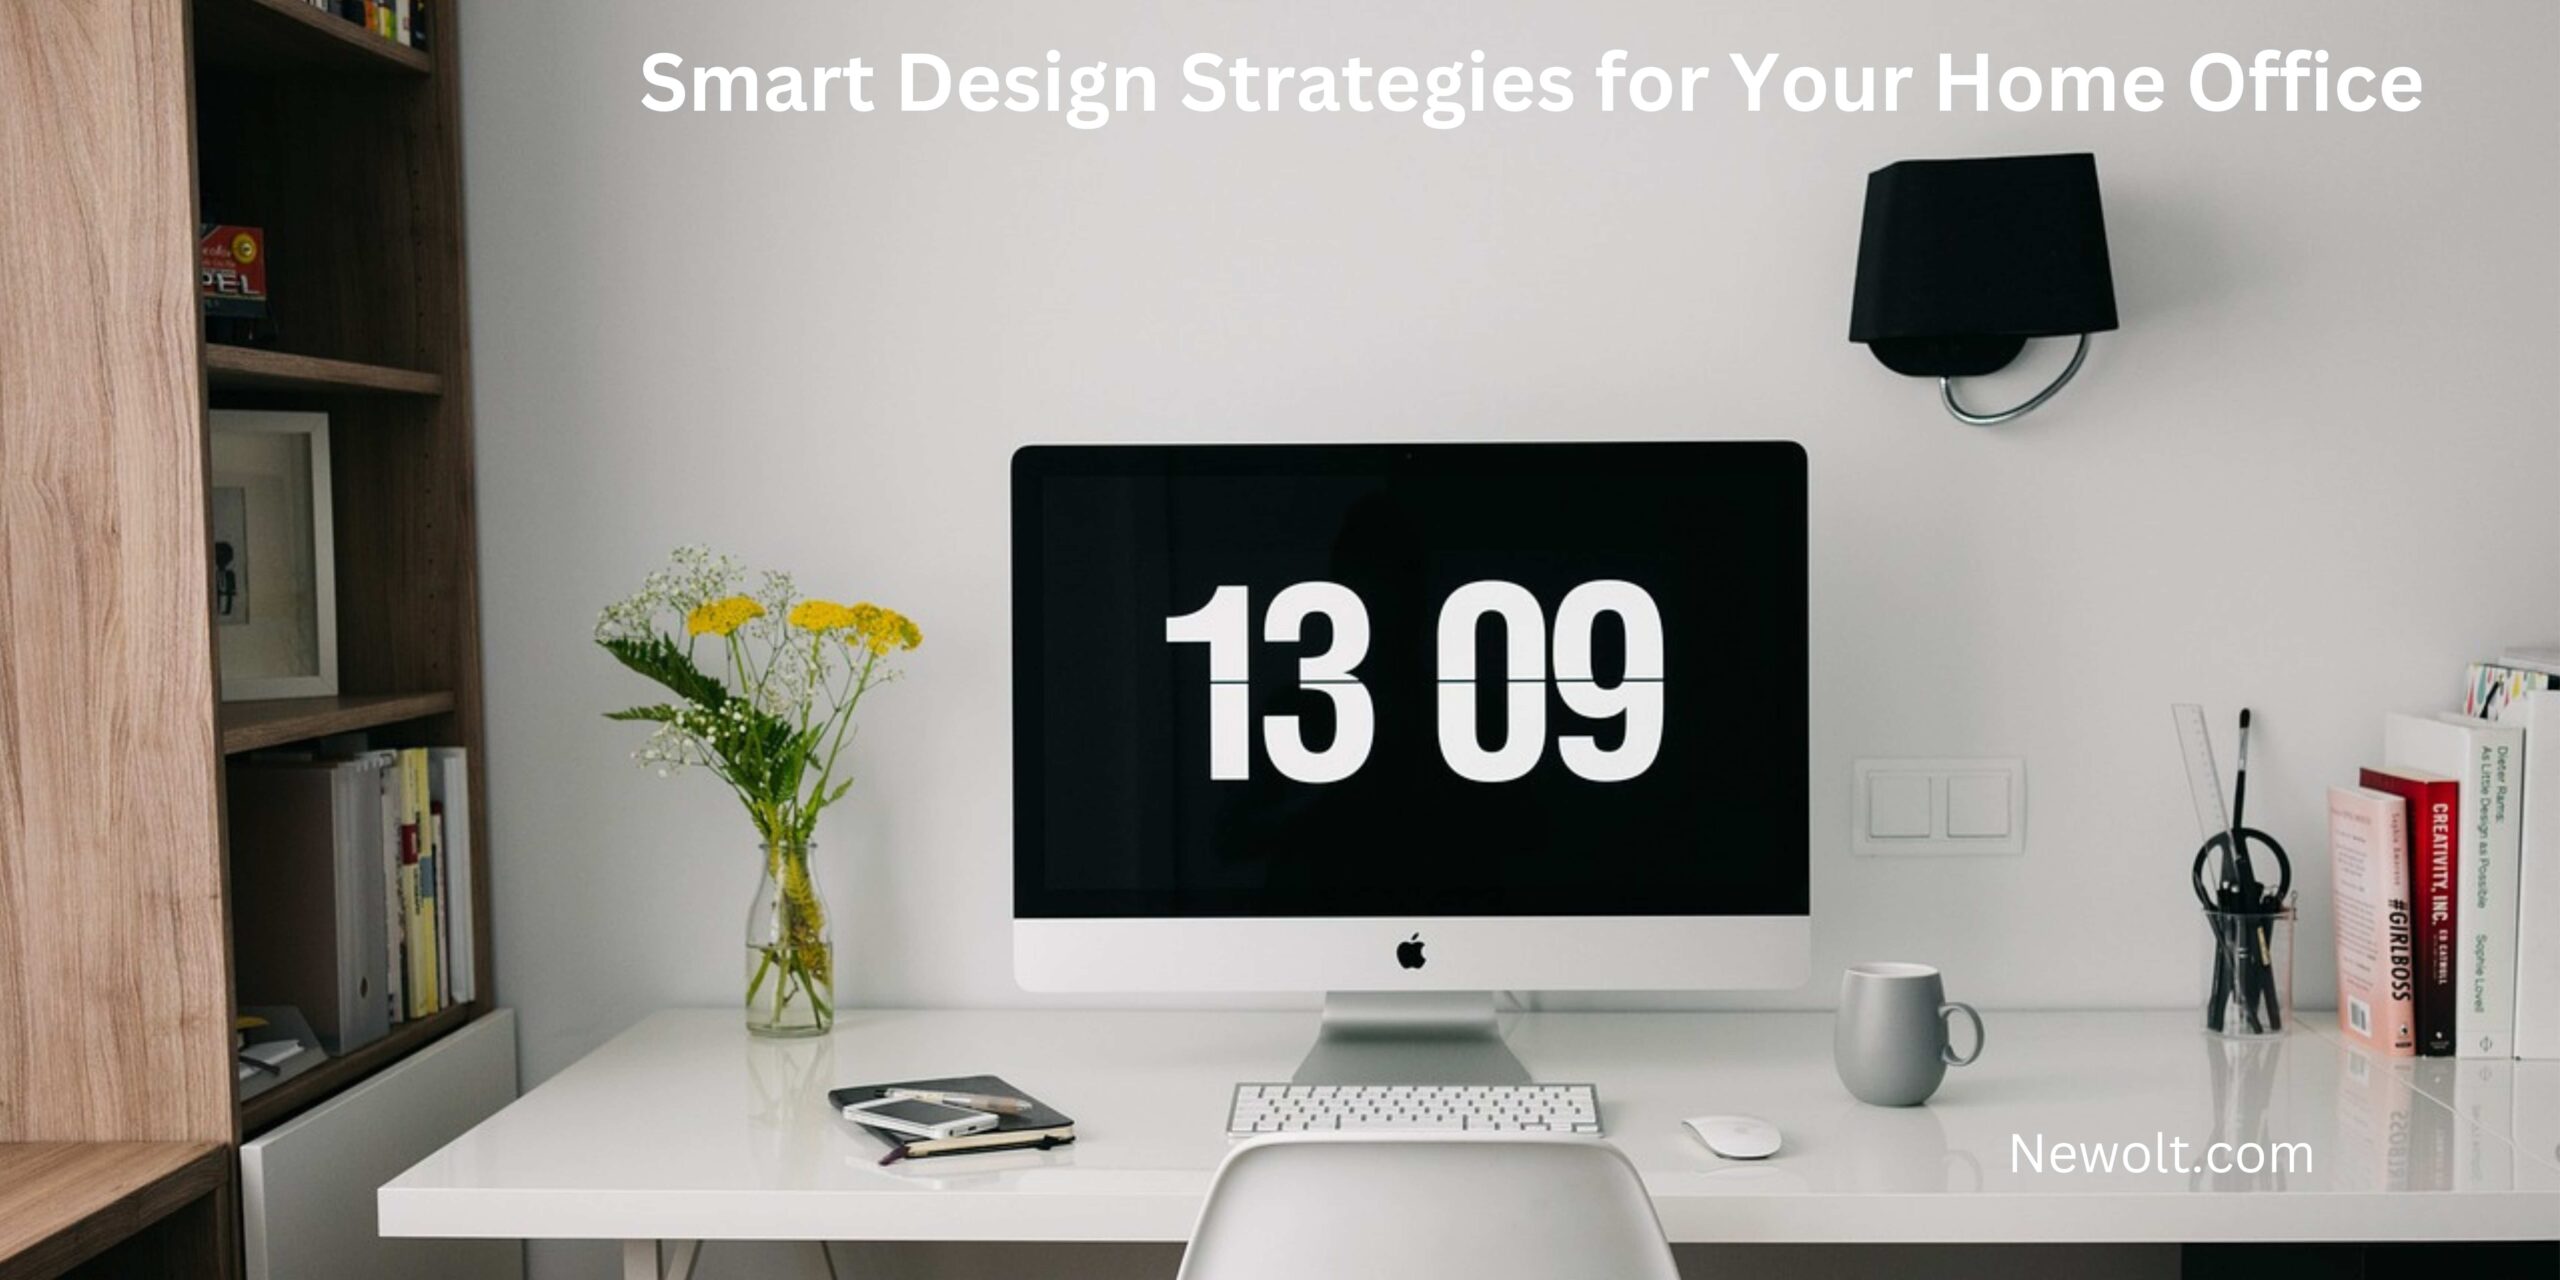 Smart Design Strategies for Your Home Office